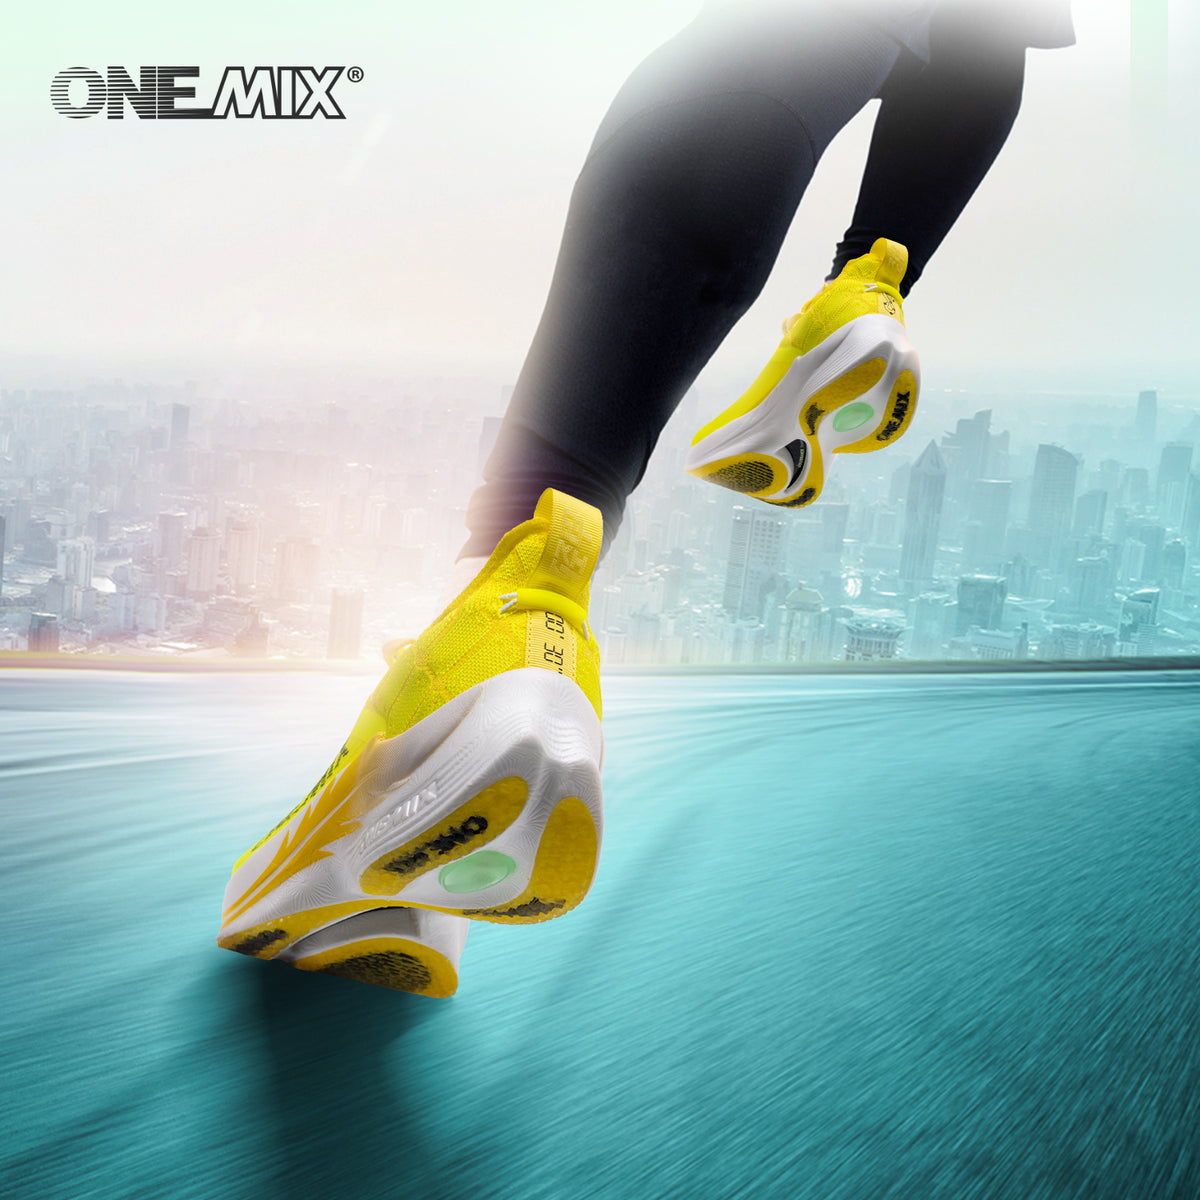 ONEMIX-"Light Armor"  21601  Carbon Plate Running Shoes Product Analysis